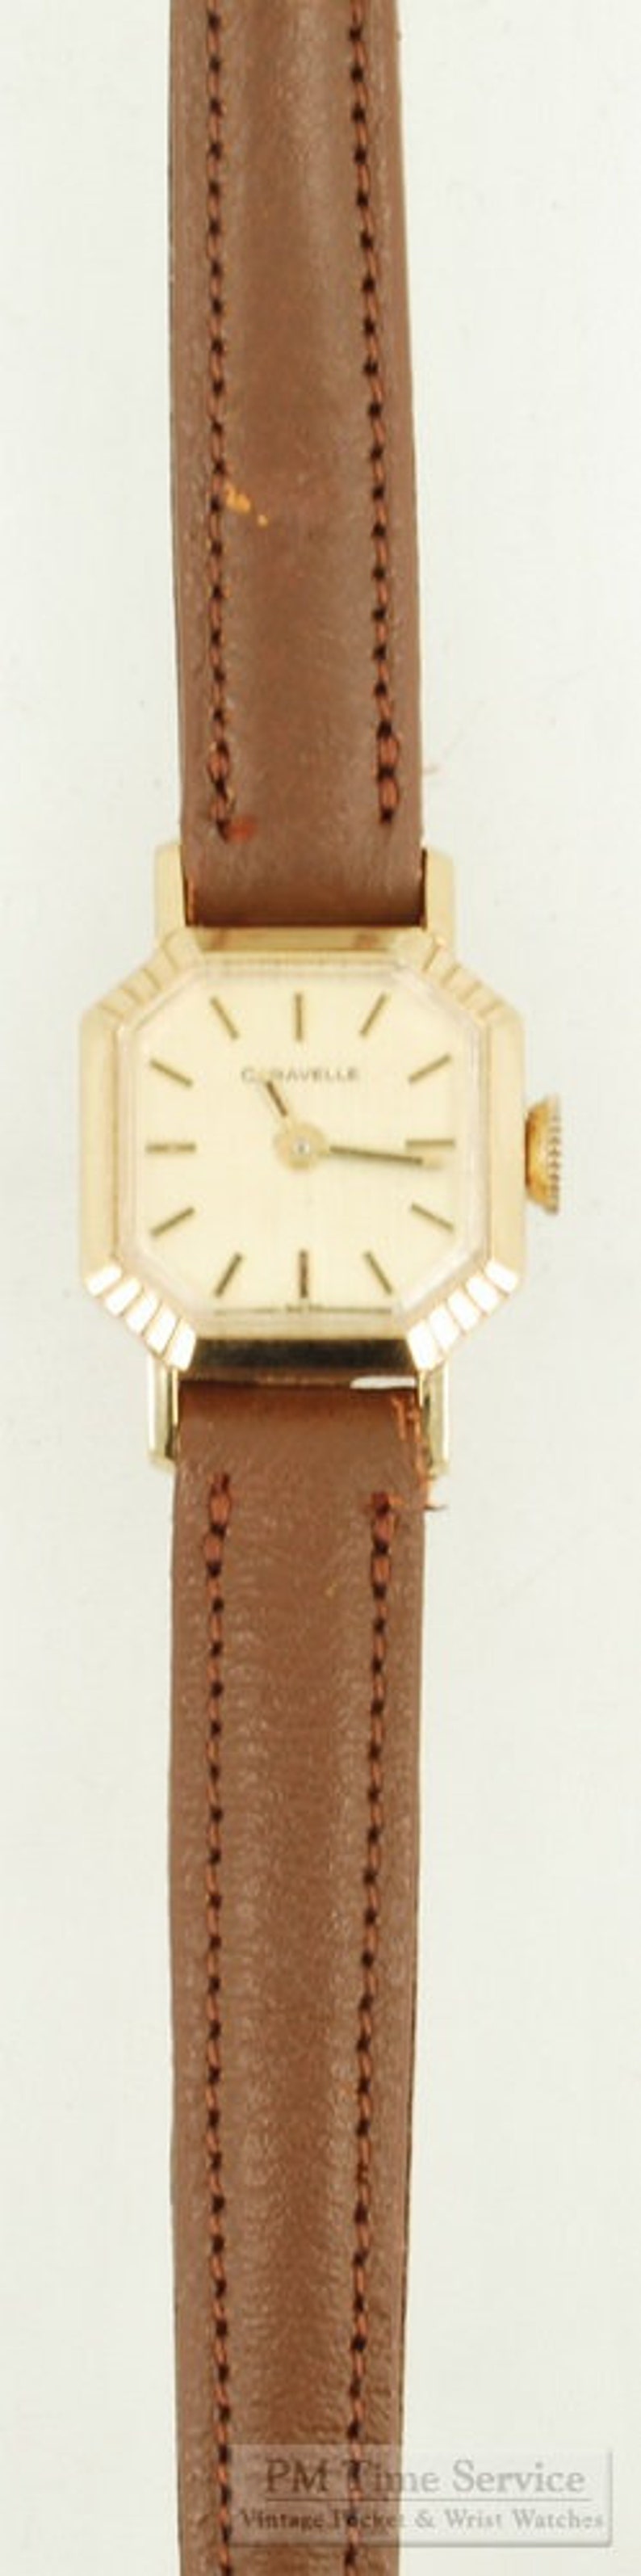 Caravelle by Bulova vintage ladies' wrist watch, 17 jewels, YBM & SS case, gold-toned pattern finish dial image 4